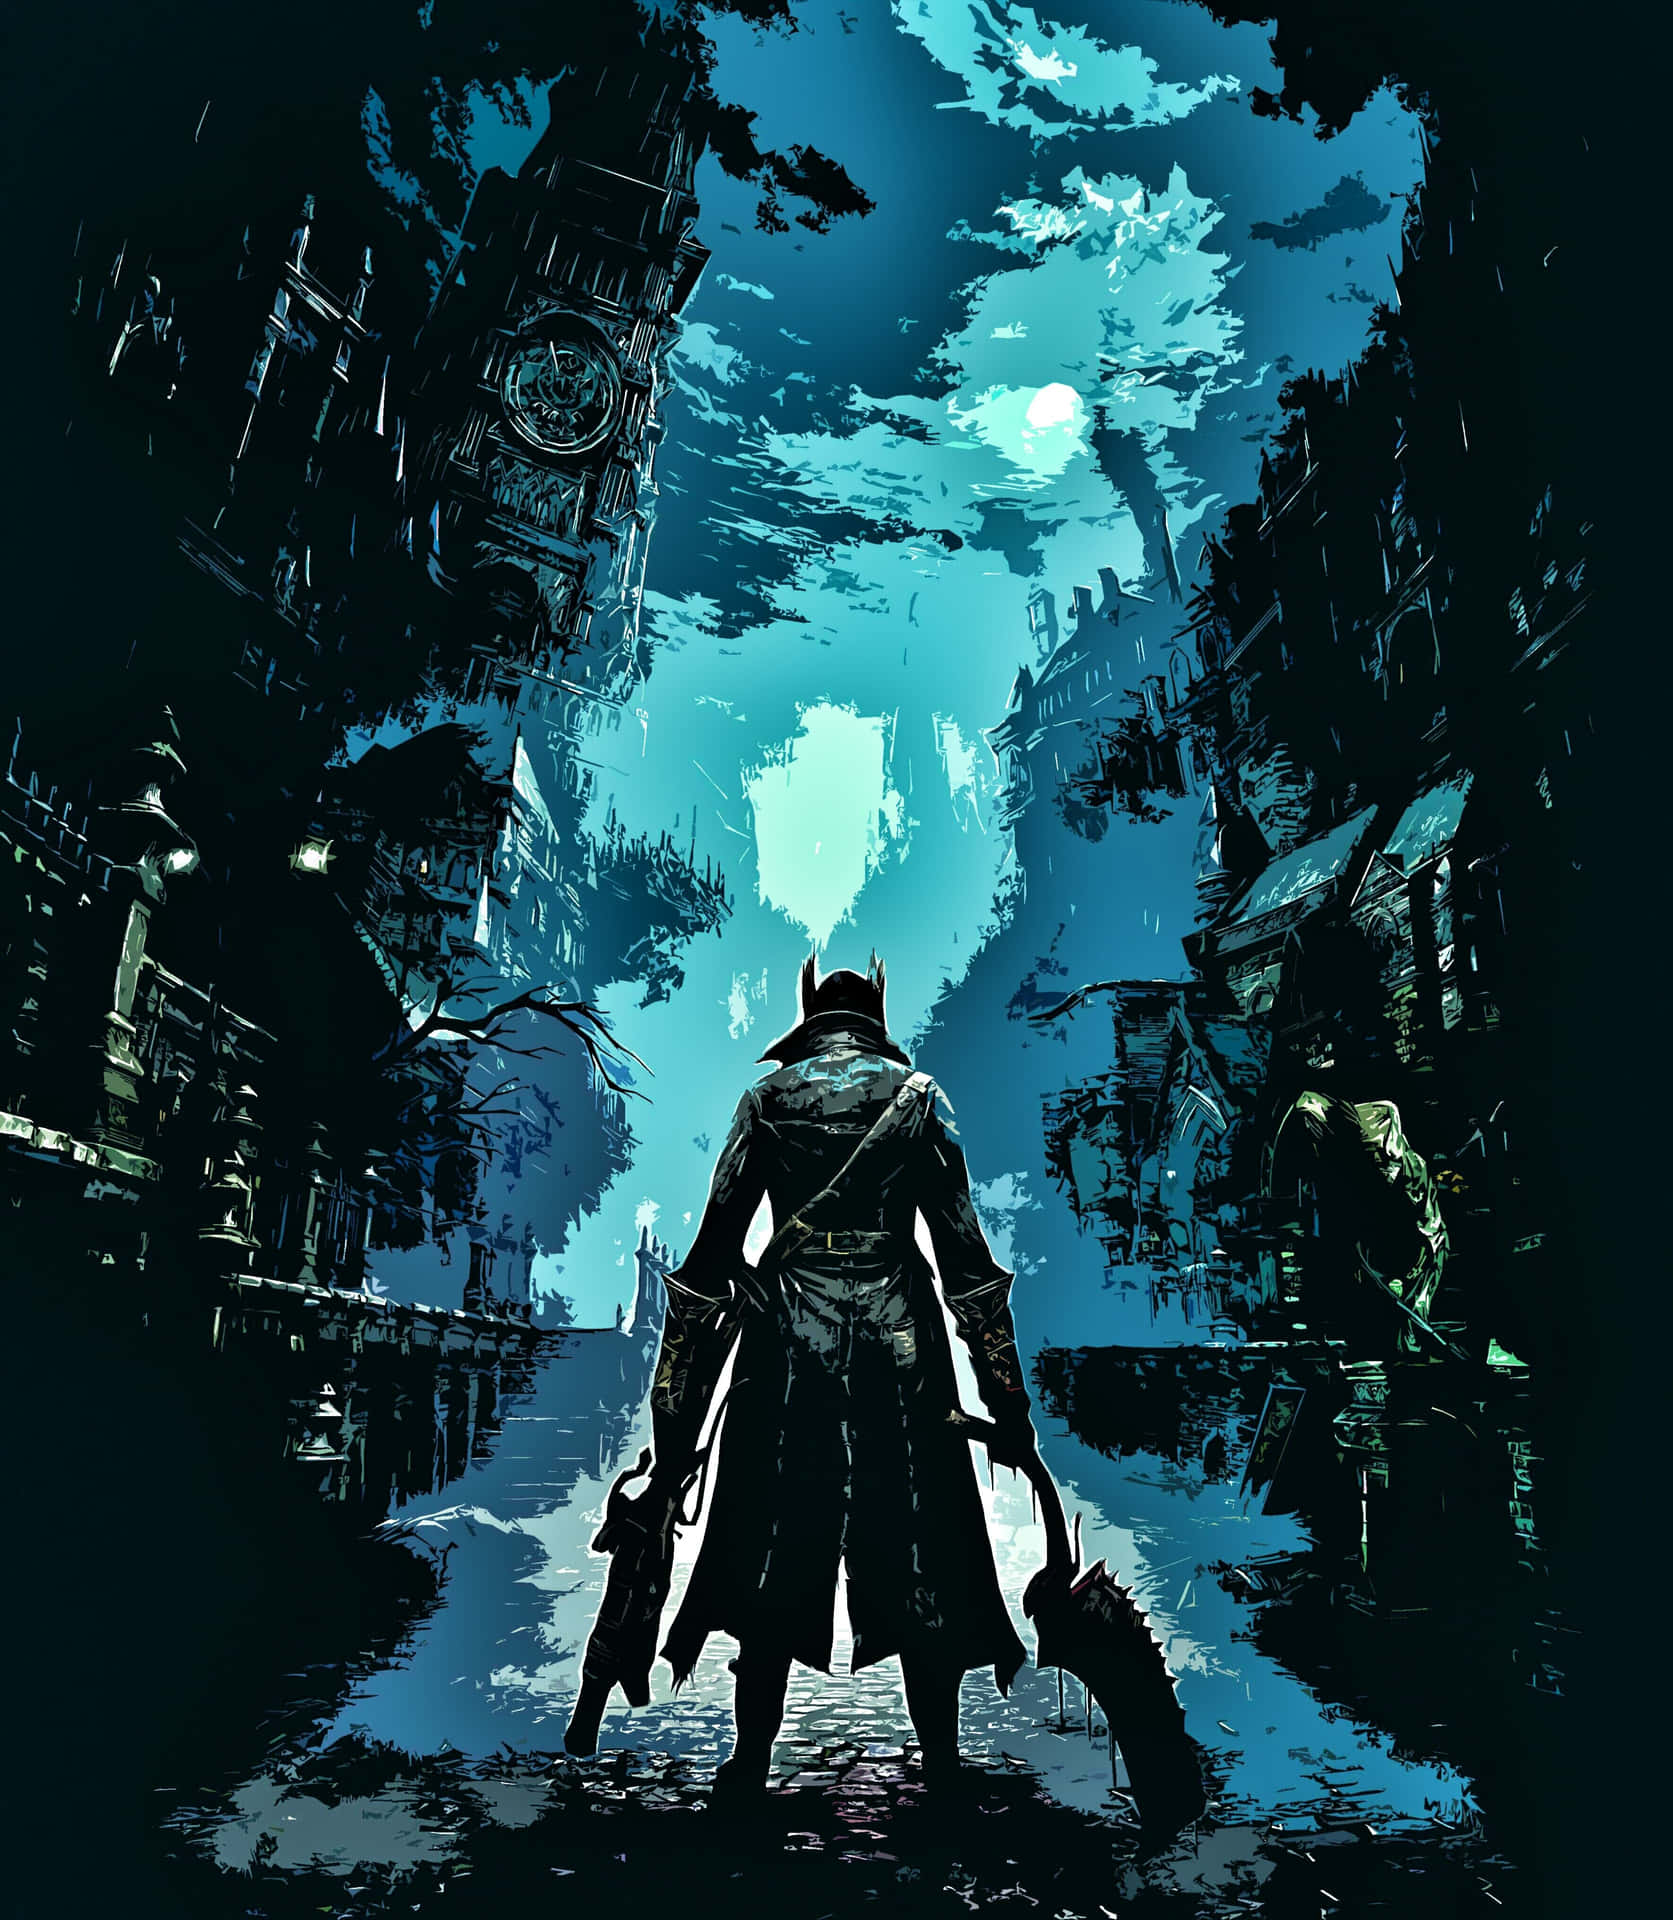 The Night Hunter roaming through the enigmatic streets of Yharnam